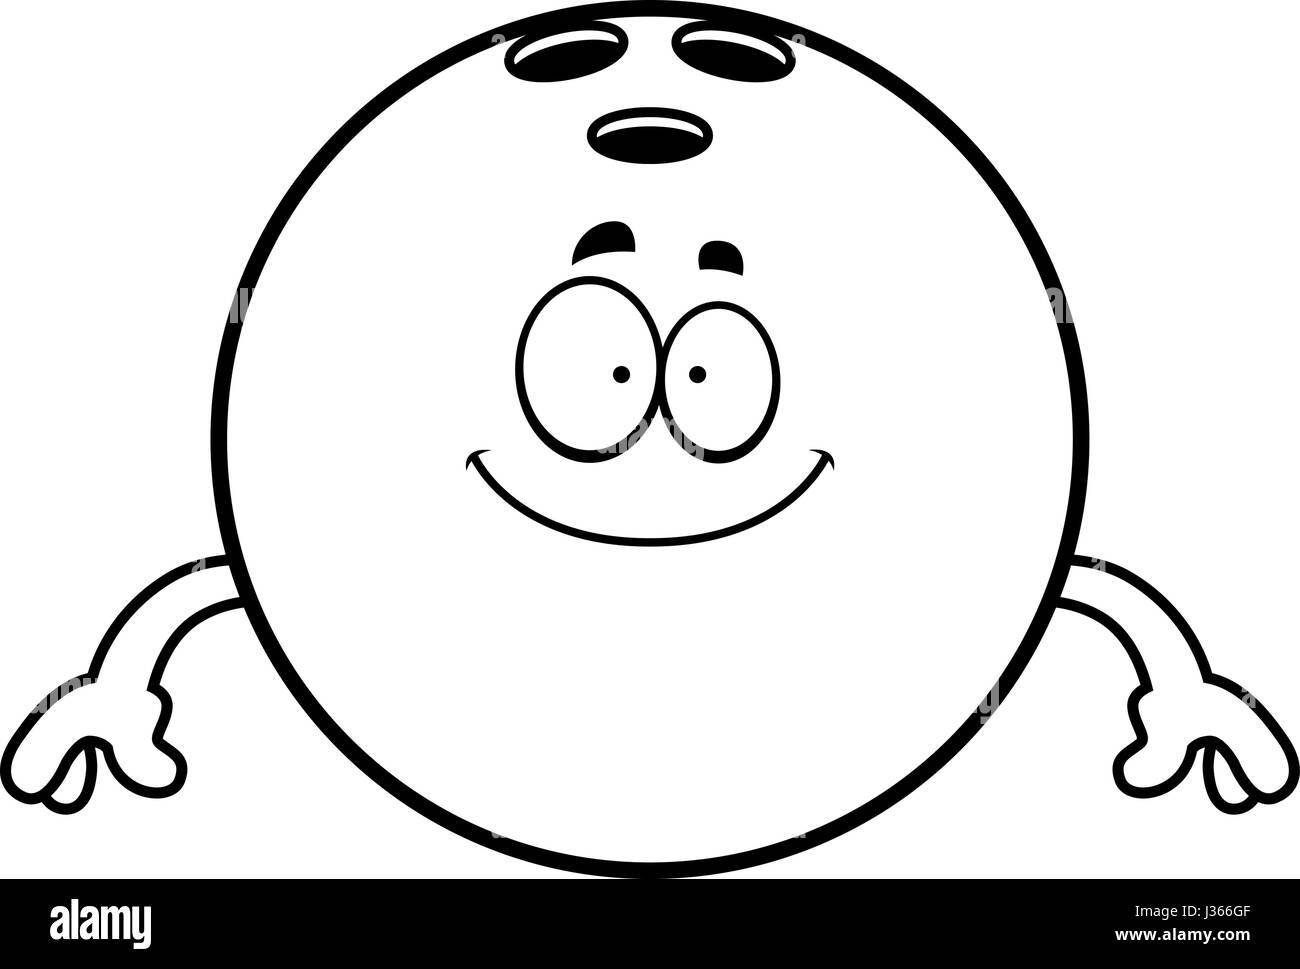 A cartoon illustration of a bowling ball looking happy. Stock Vector